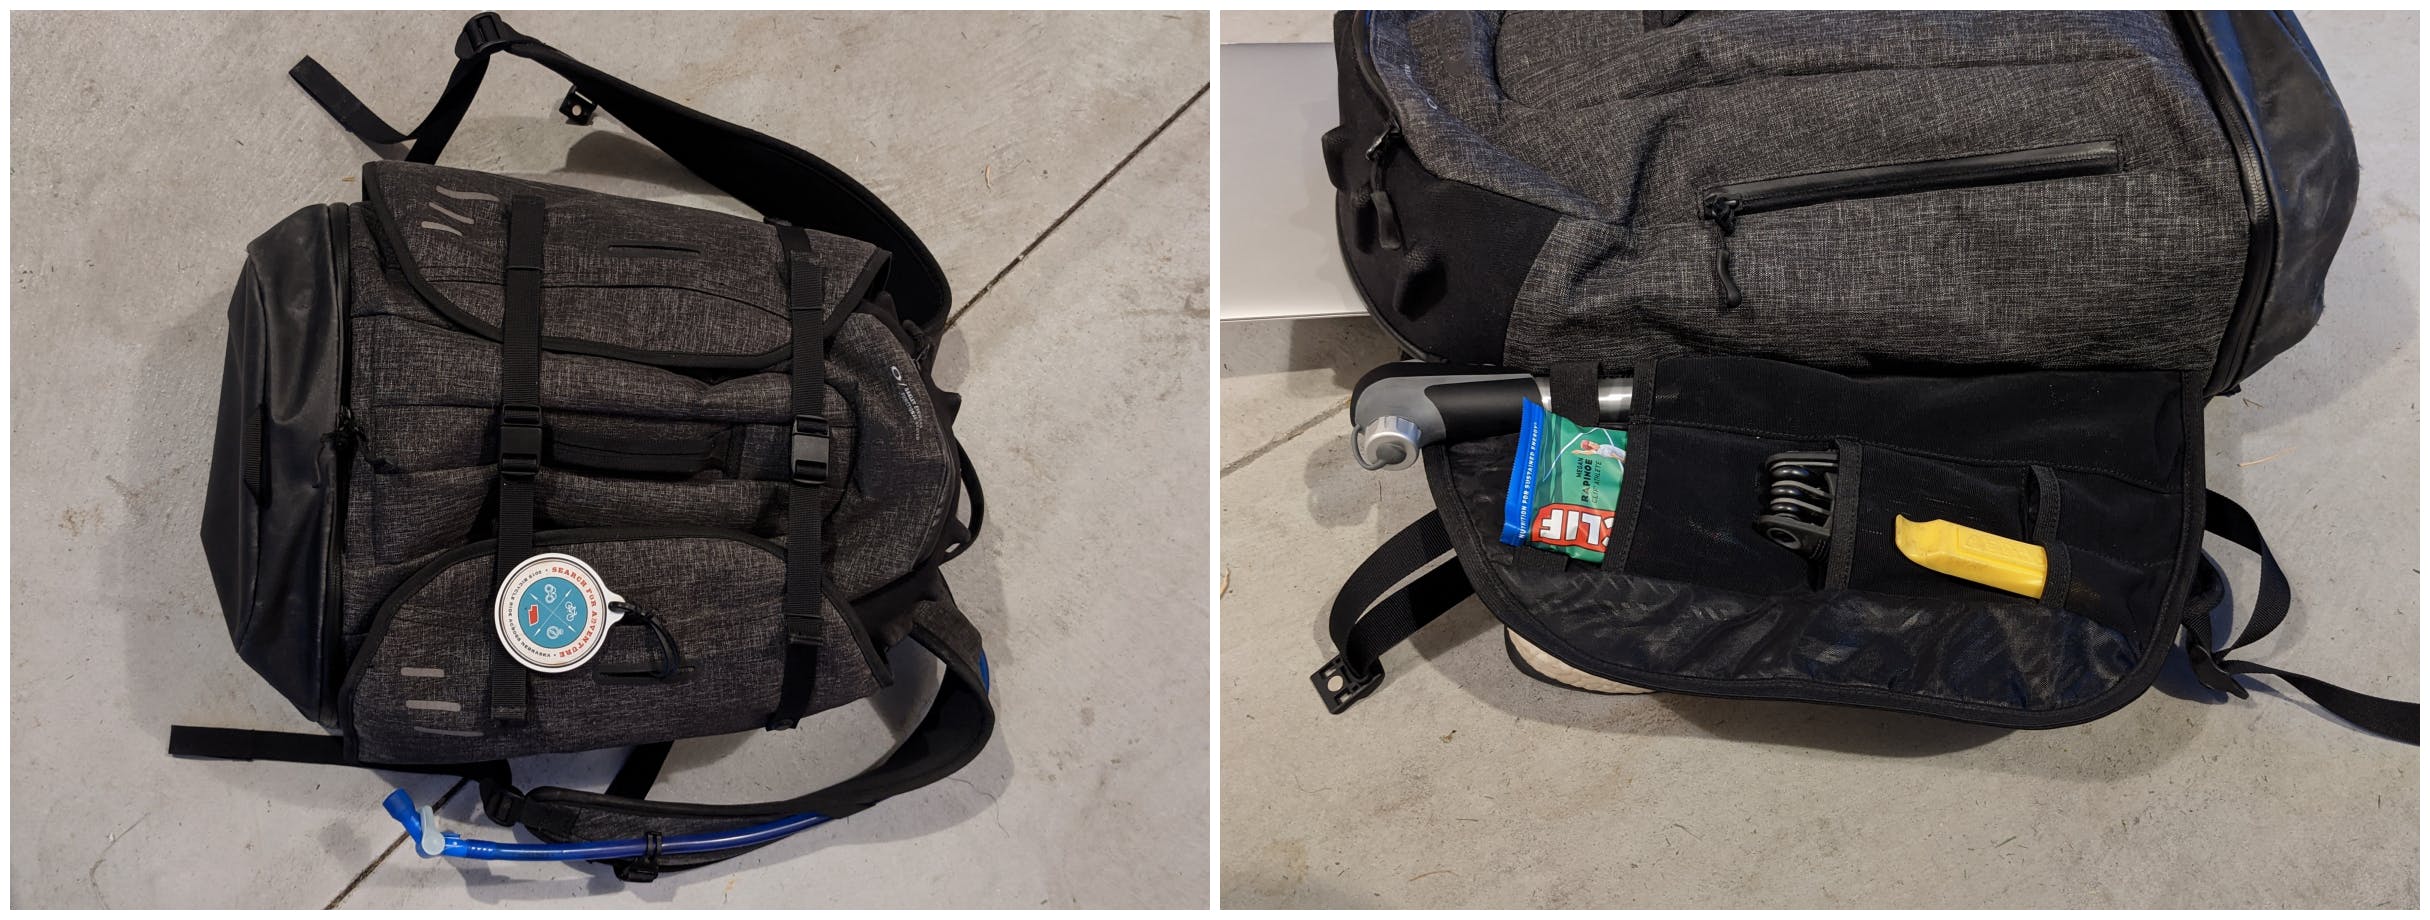 Two photos of a grey biking backpack. The second photo shows items stored in a side pocket, including bike tools and a Clif bar